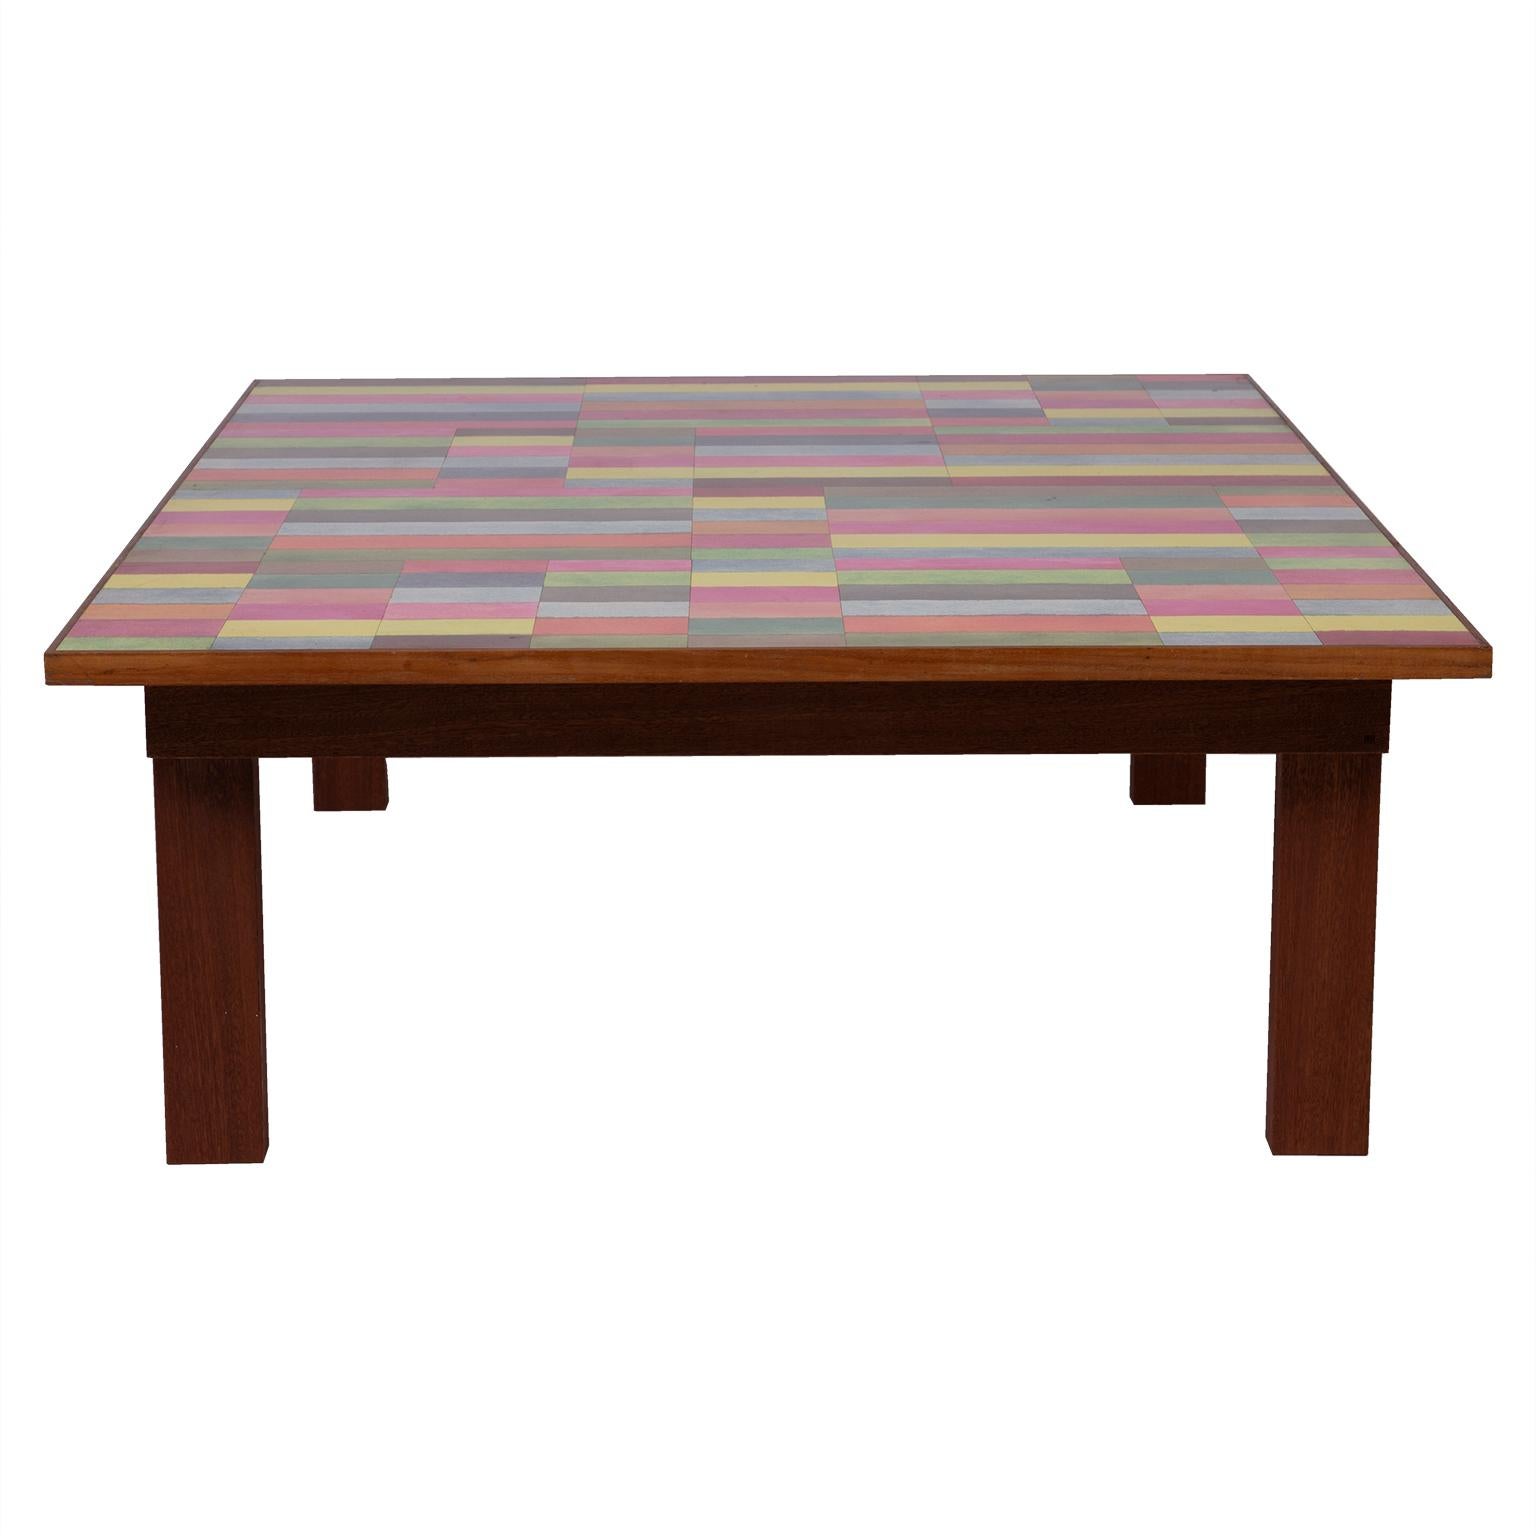 Multicolour Rectangles Table by DANAD Design 'Barry Daniels' In Good Condition For Sale In London, GB